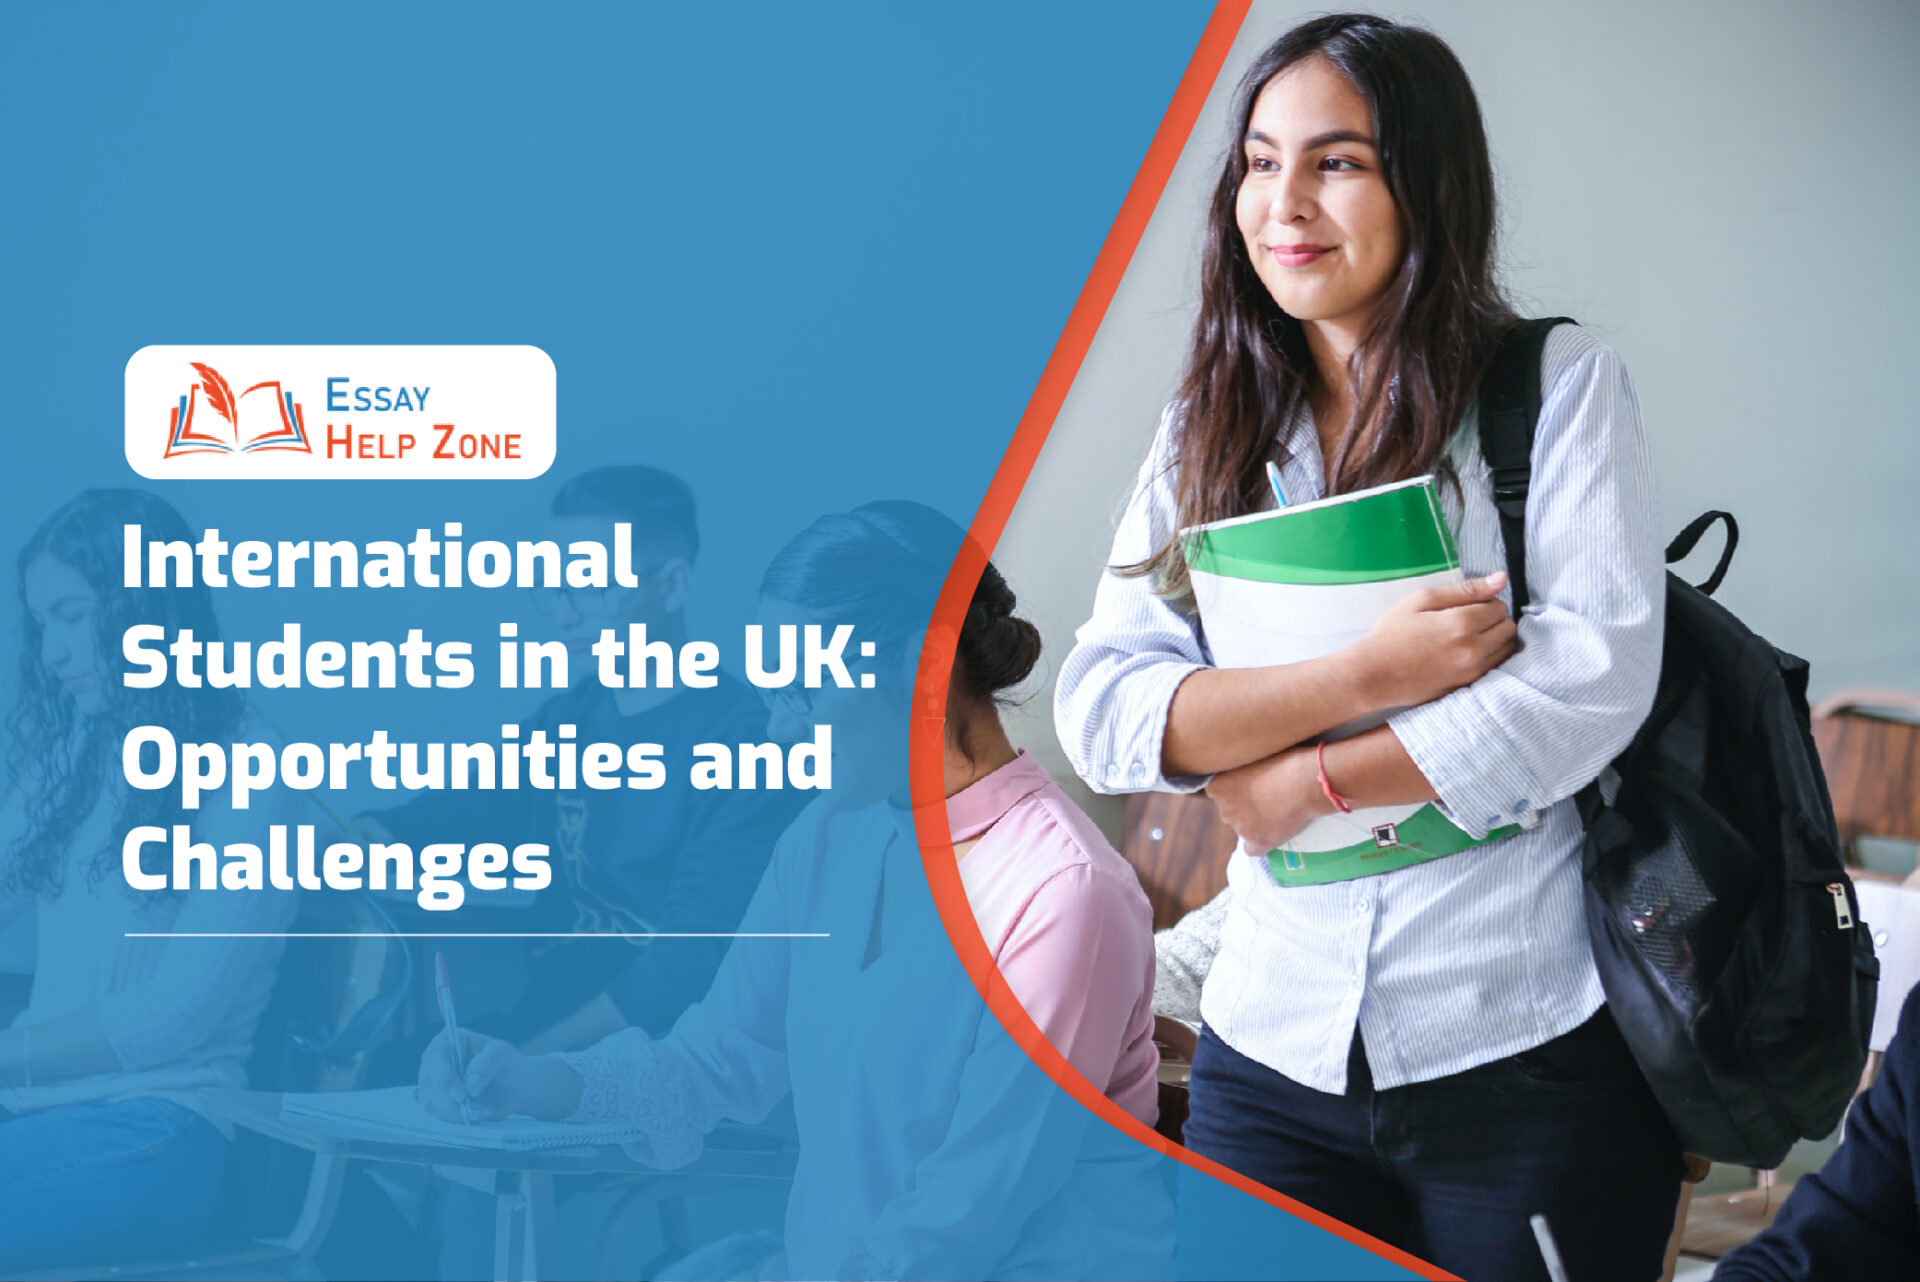 International Students in the UK Opportunities and Challenges